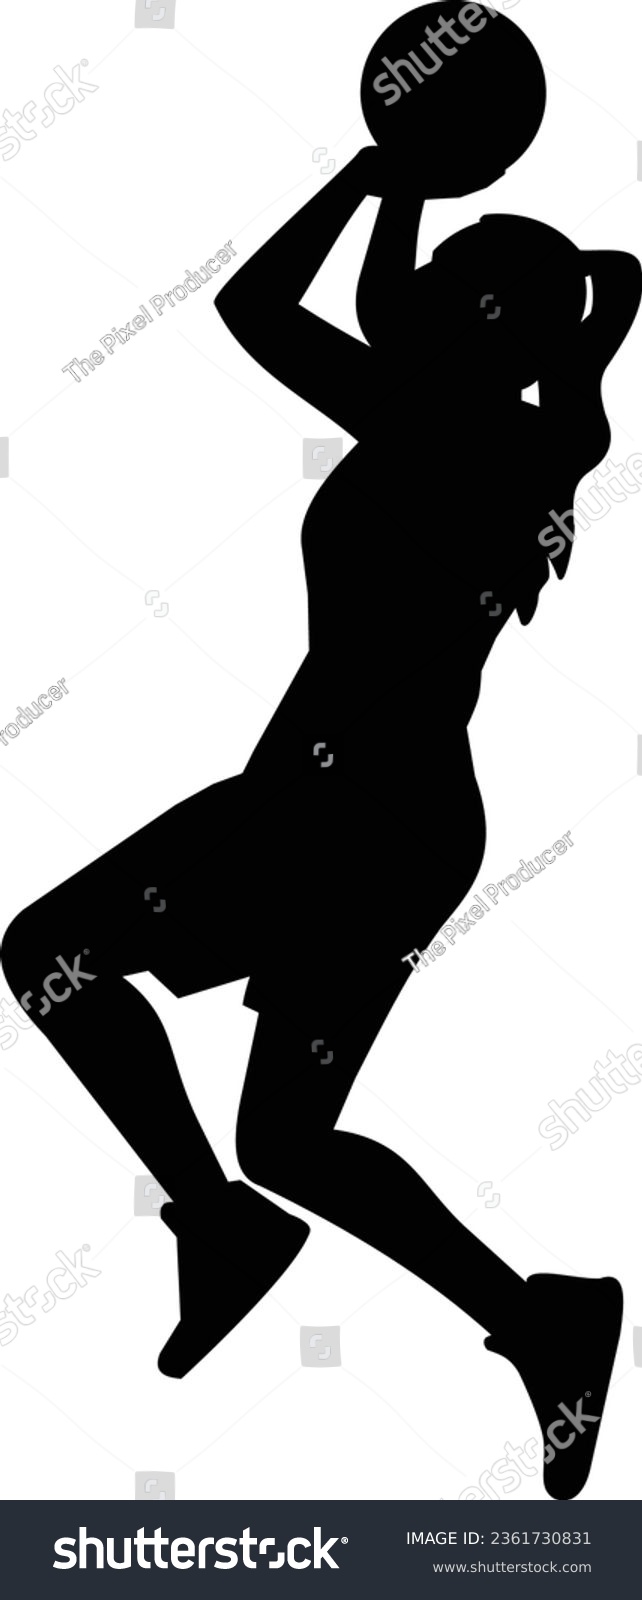 SVG of Isolated black silhouette female basketball player shooting basketball svg